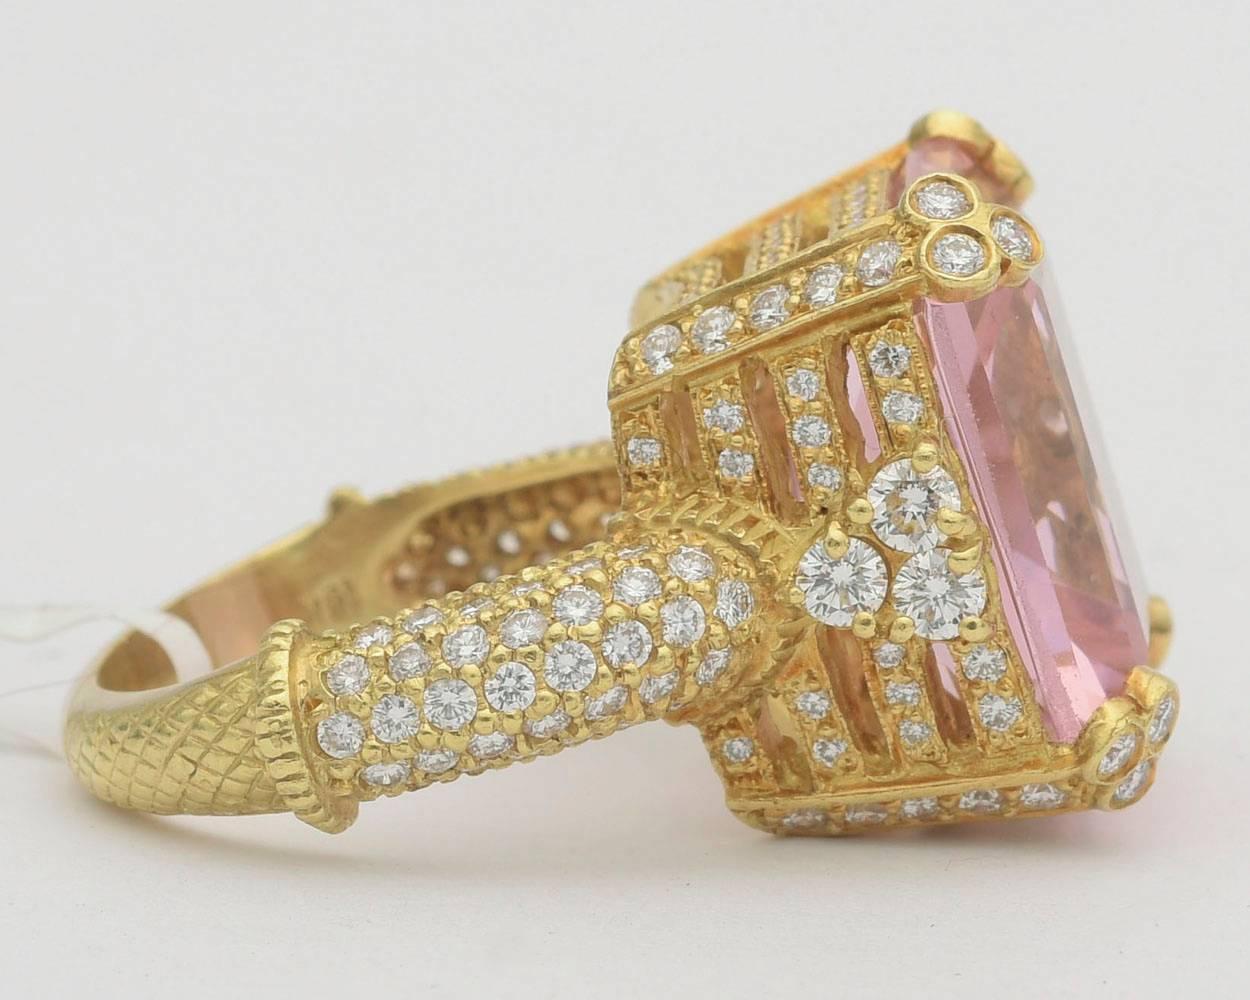 Pink quartz ring with pavé diamond prongs, the pink quartz measuring 17 x 15mm from the top, as well as elegant diamond-set profile and band, mounted in 18k yellow gold, signed Judith Ripka. Size 6.